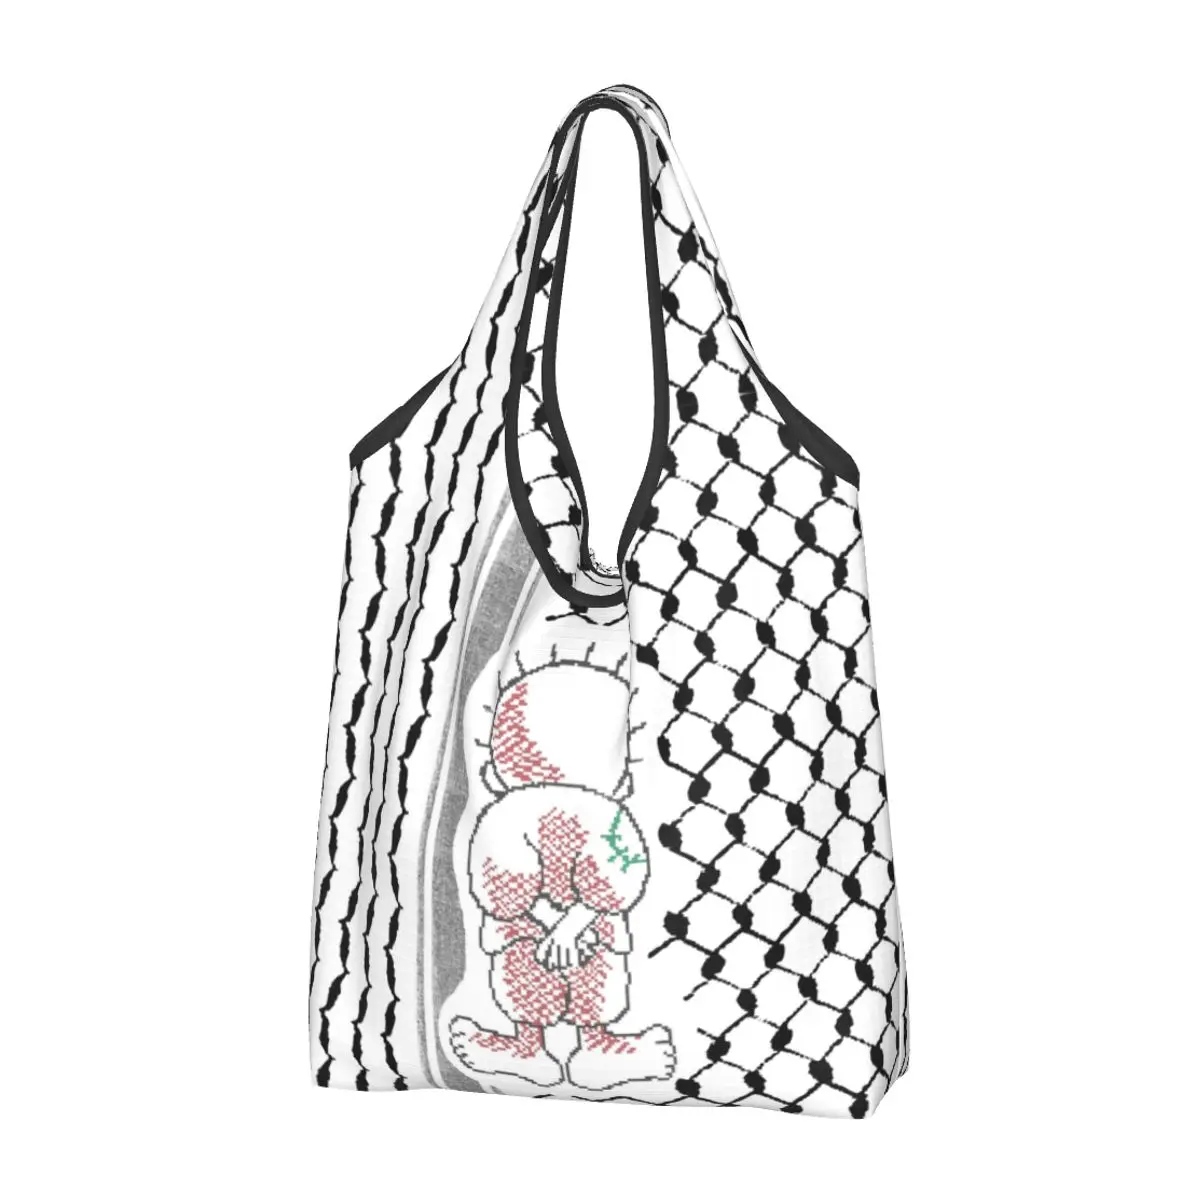 

Reusable Palestinian Palestine Kufiya Shopping Bags for Groceries Keffiyeh Pattern Grocery Bags Washable Large Tote Bags